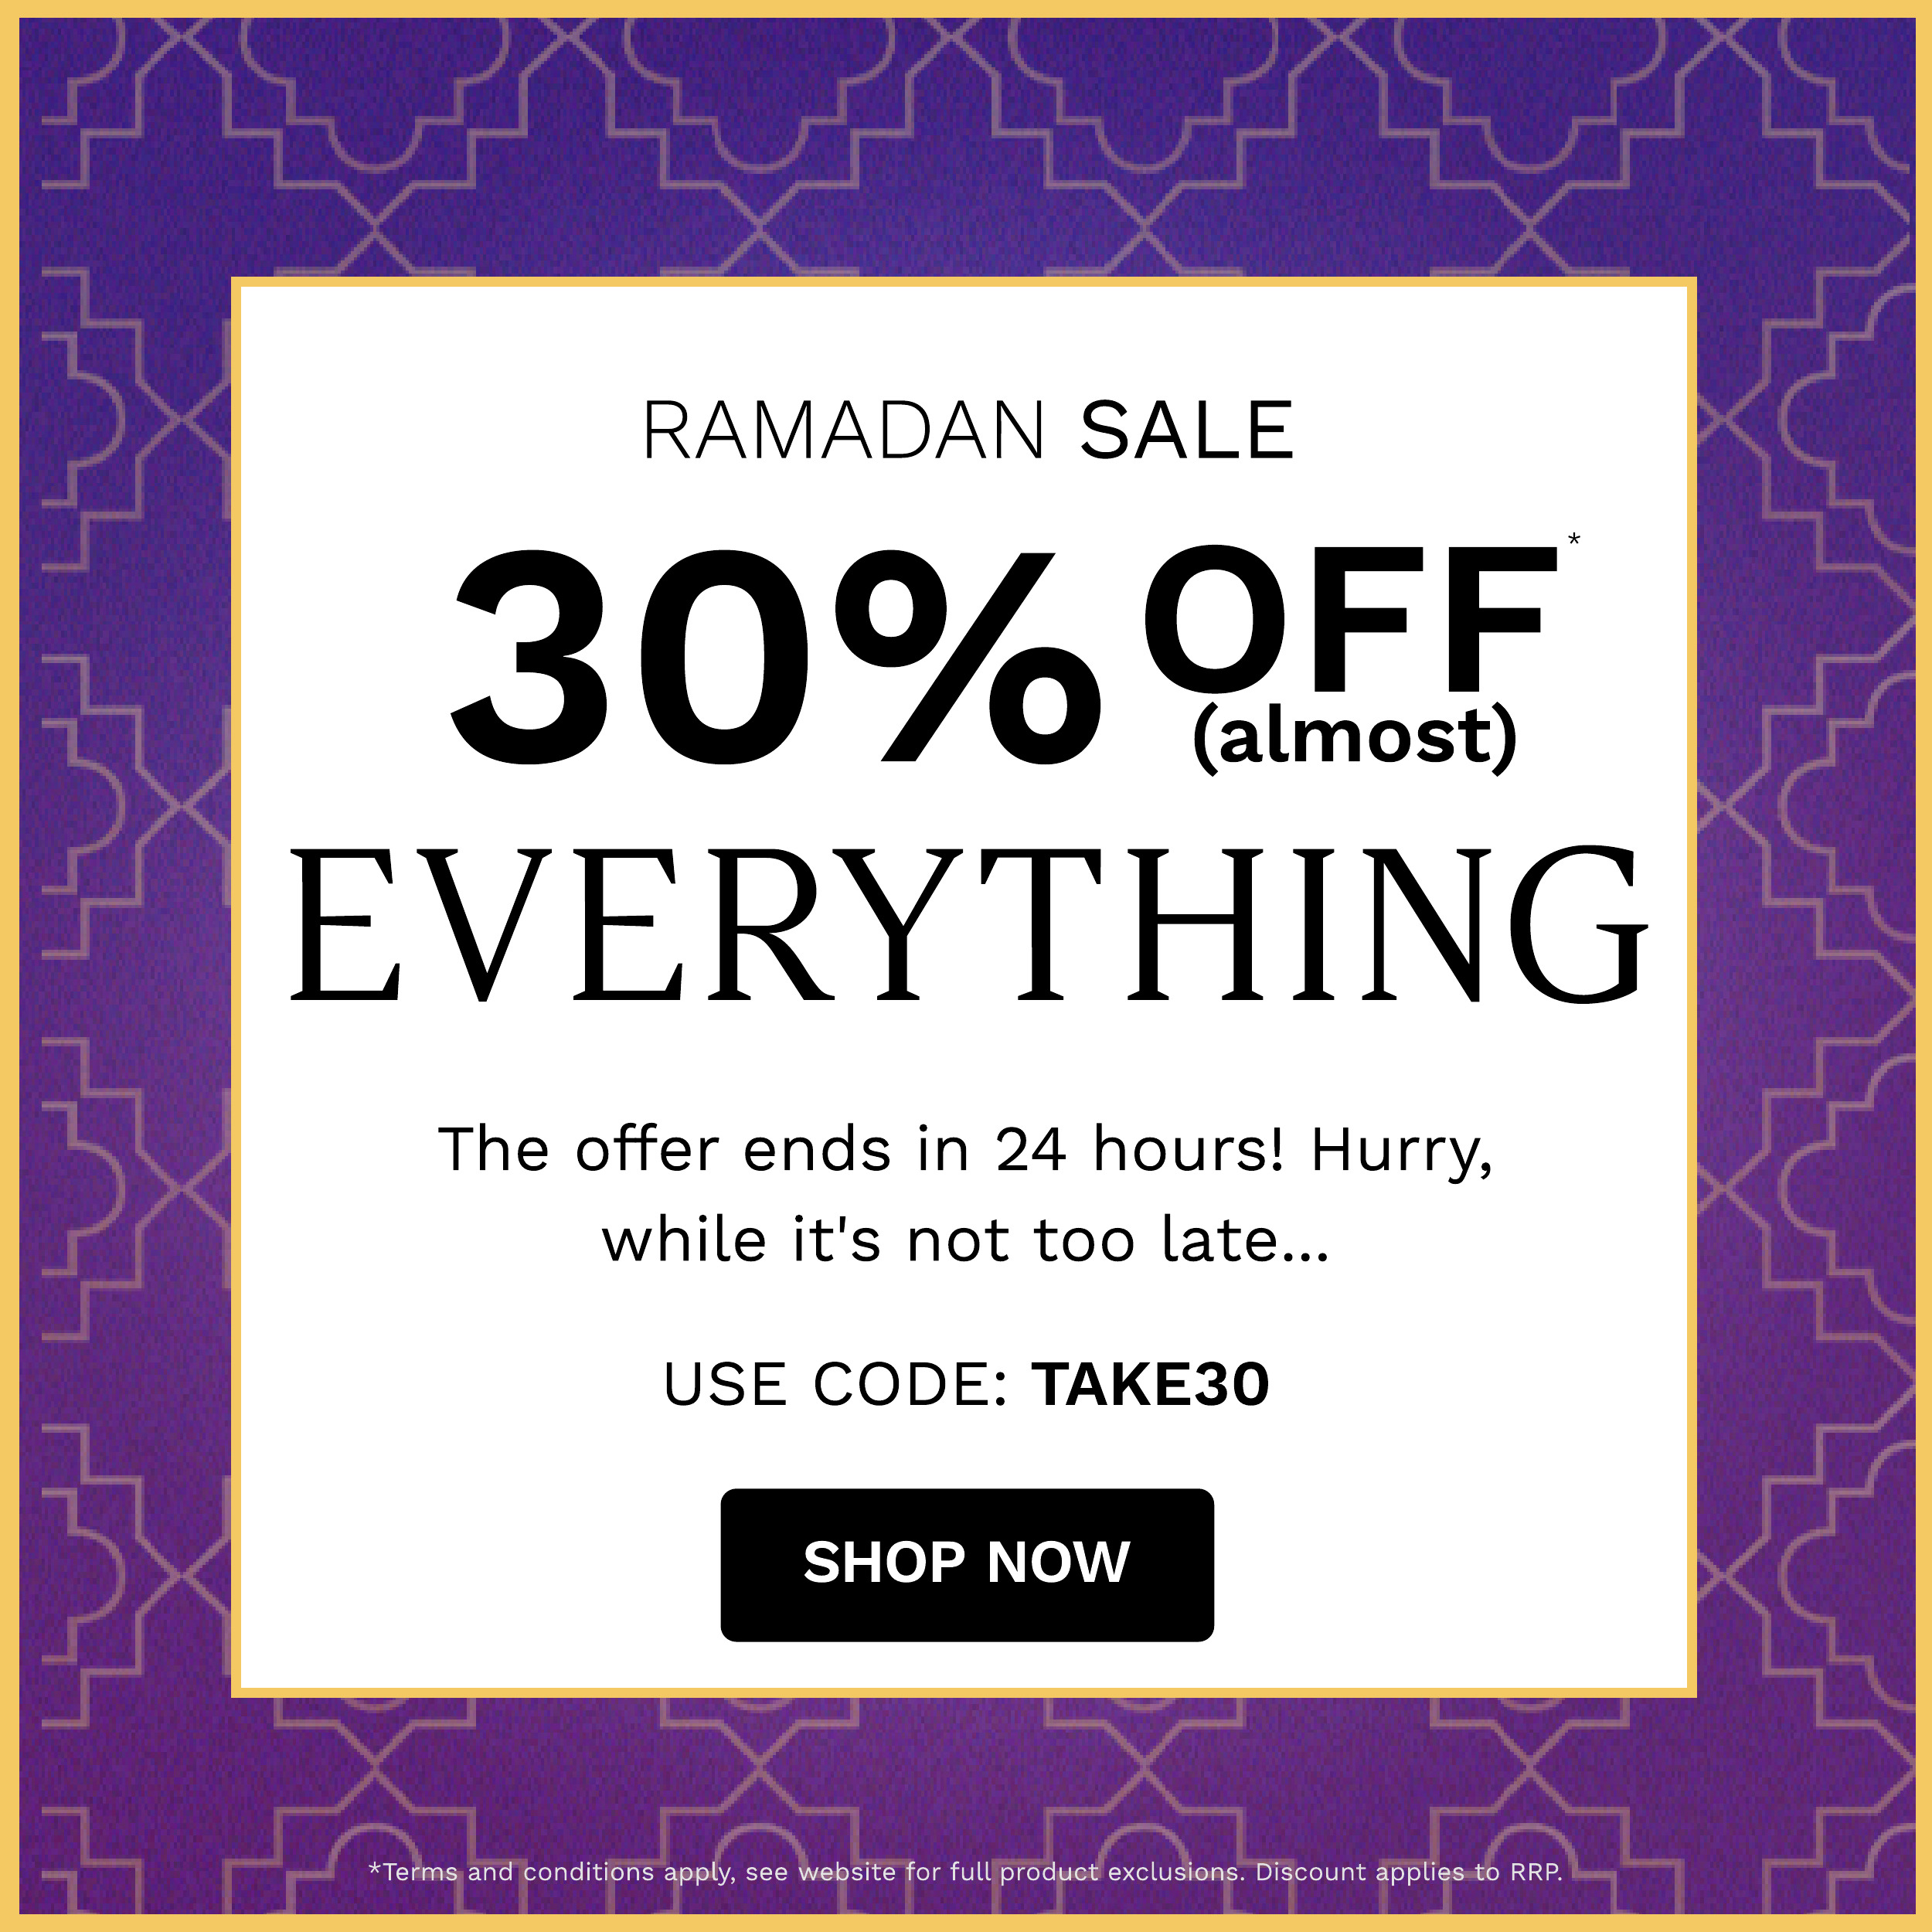 RAMADAN SALE 30%QFF EVERYTHING The offer ends in 24 hours! Hurry, while it's not too late... USE CODE: TAKE30 SHOP NOW conditions apply, see website for full produet exclusions. Discount applies-to RRP. 